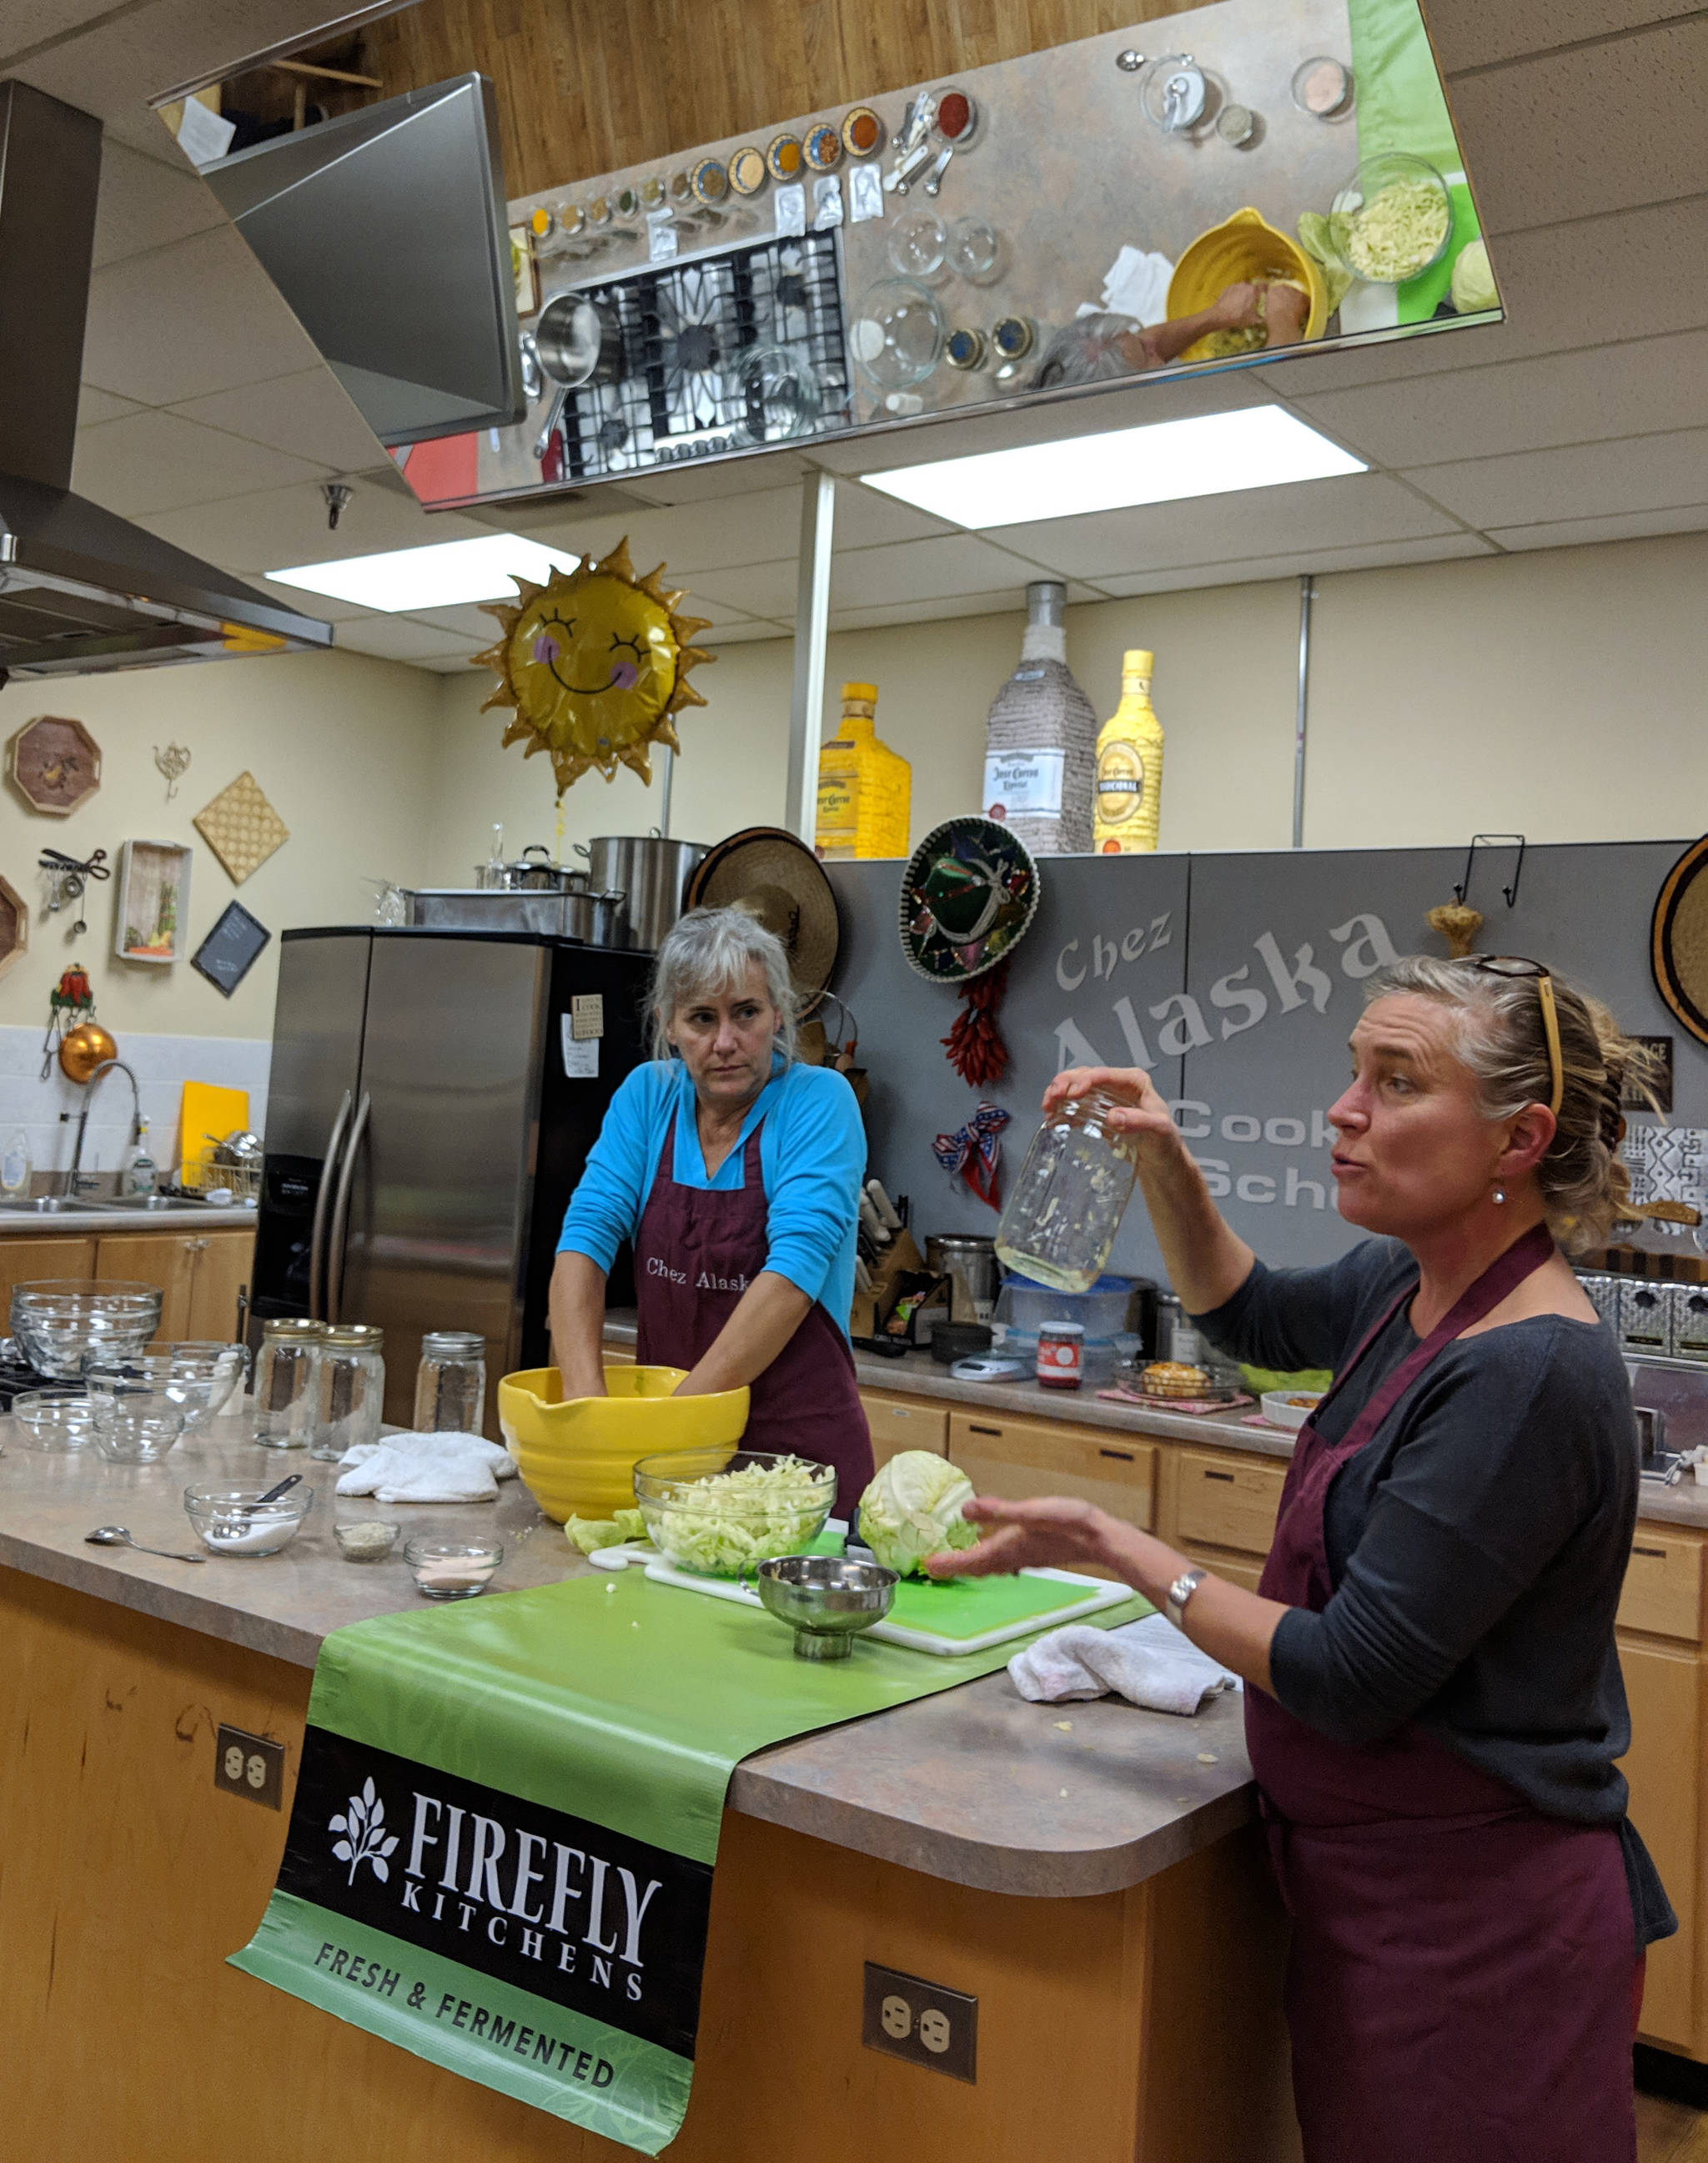 Julie O’Brien, a University of Alaska Southeast alumna and owner of Firefly Kitchens, holds a jar up while Julie Hamilton, a assistant professor of accounting for UAS, works on cut cabbage during Fermentation 101. The workshop focused on the benefits of fermented foods and how folks could make their own. The large mirror above the counter at Chez Alaska Cooking School allowed the audience to see how the food prep was done. (Ben Hohenstatt | Capital City Weekly)